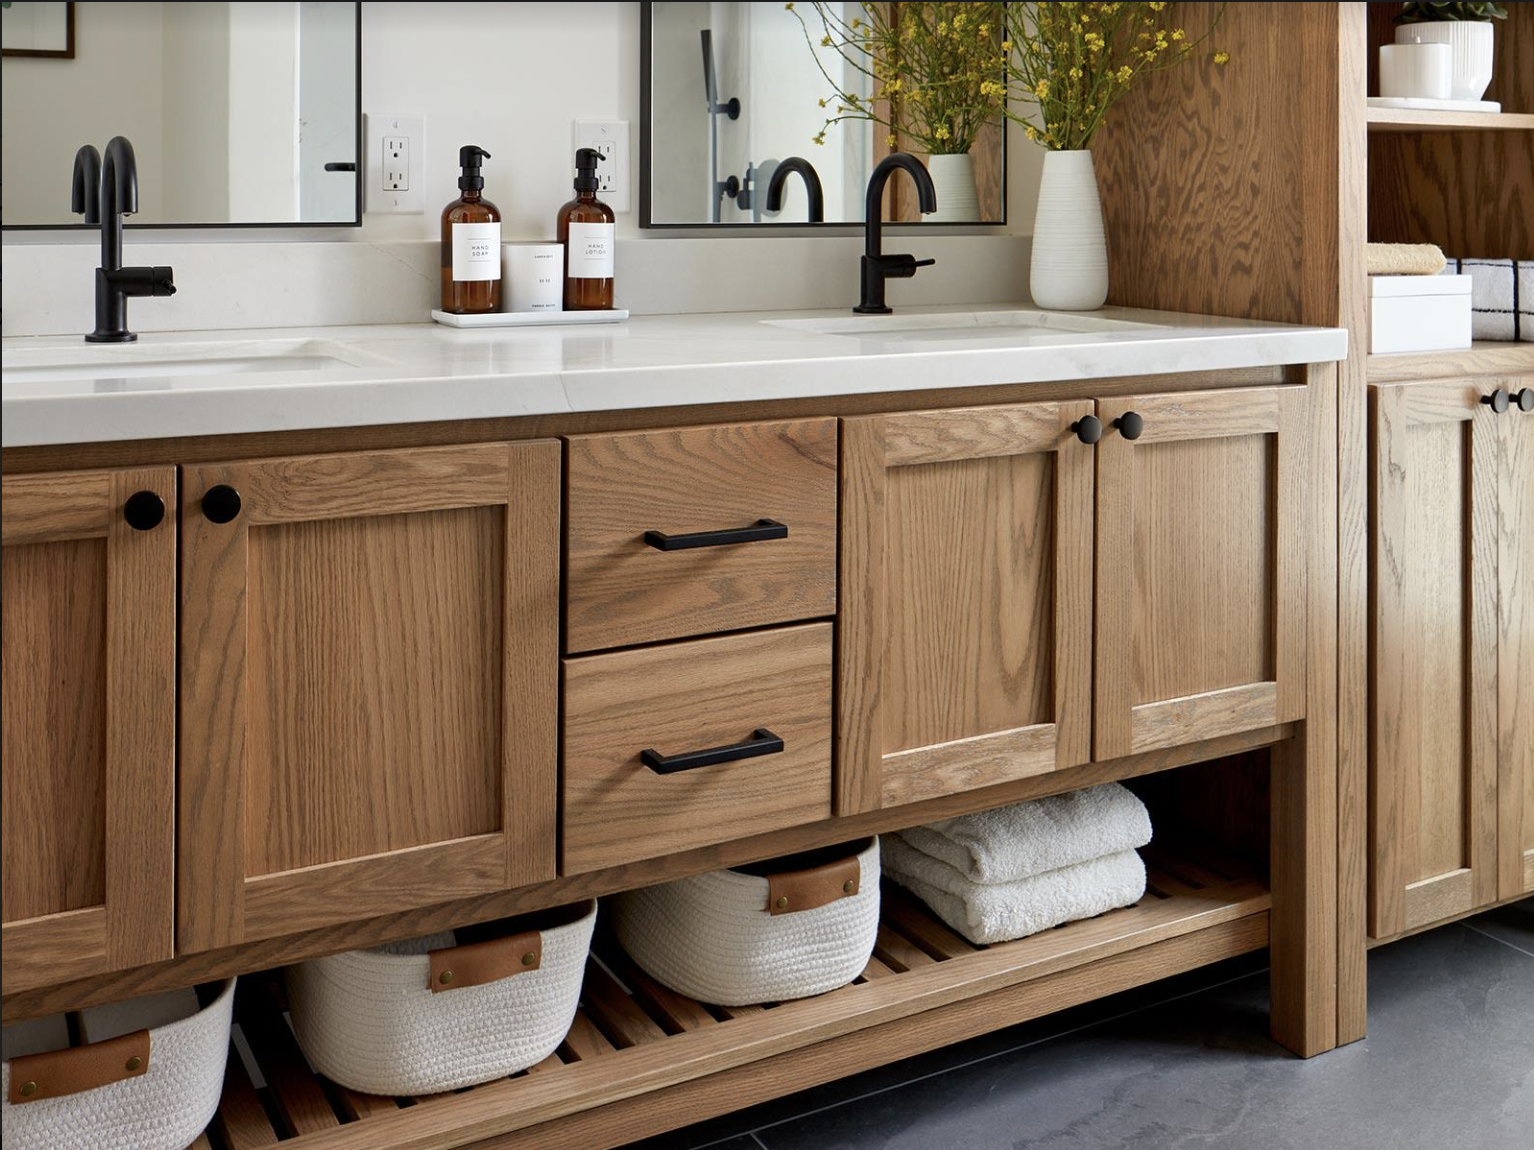 All Our Bathroom Products - Bertch Cabinets